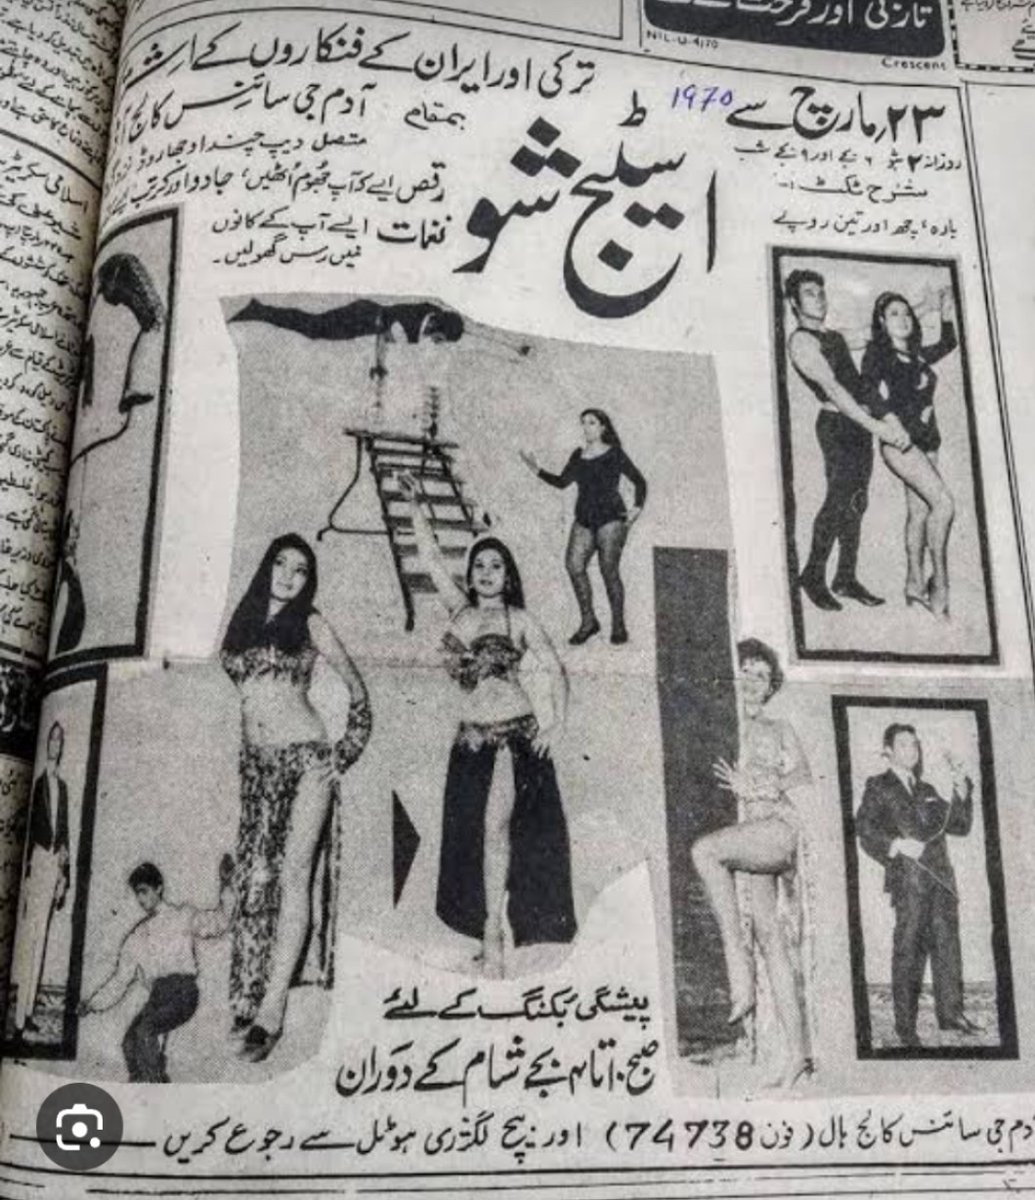 How progressive was this land.Look at the ad of Adam Adamjee college circa 1970s